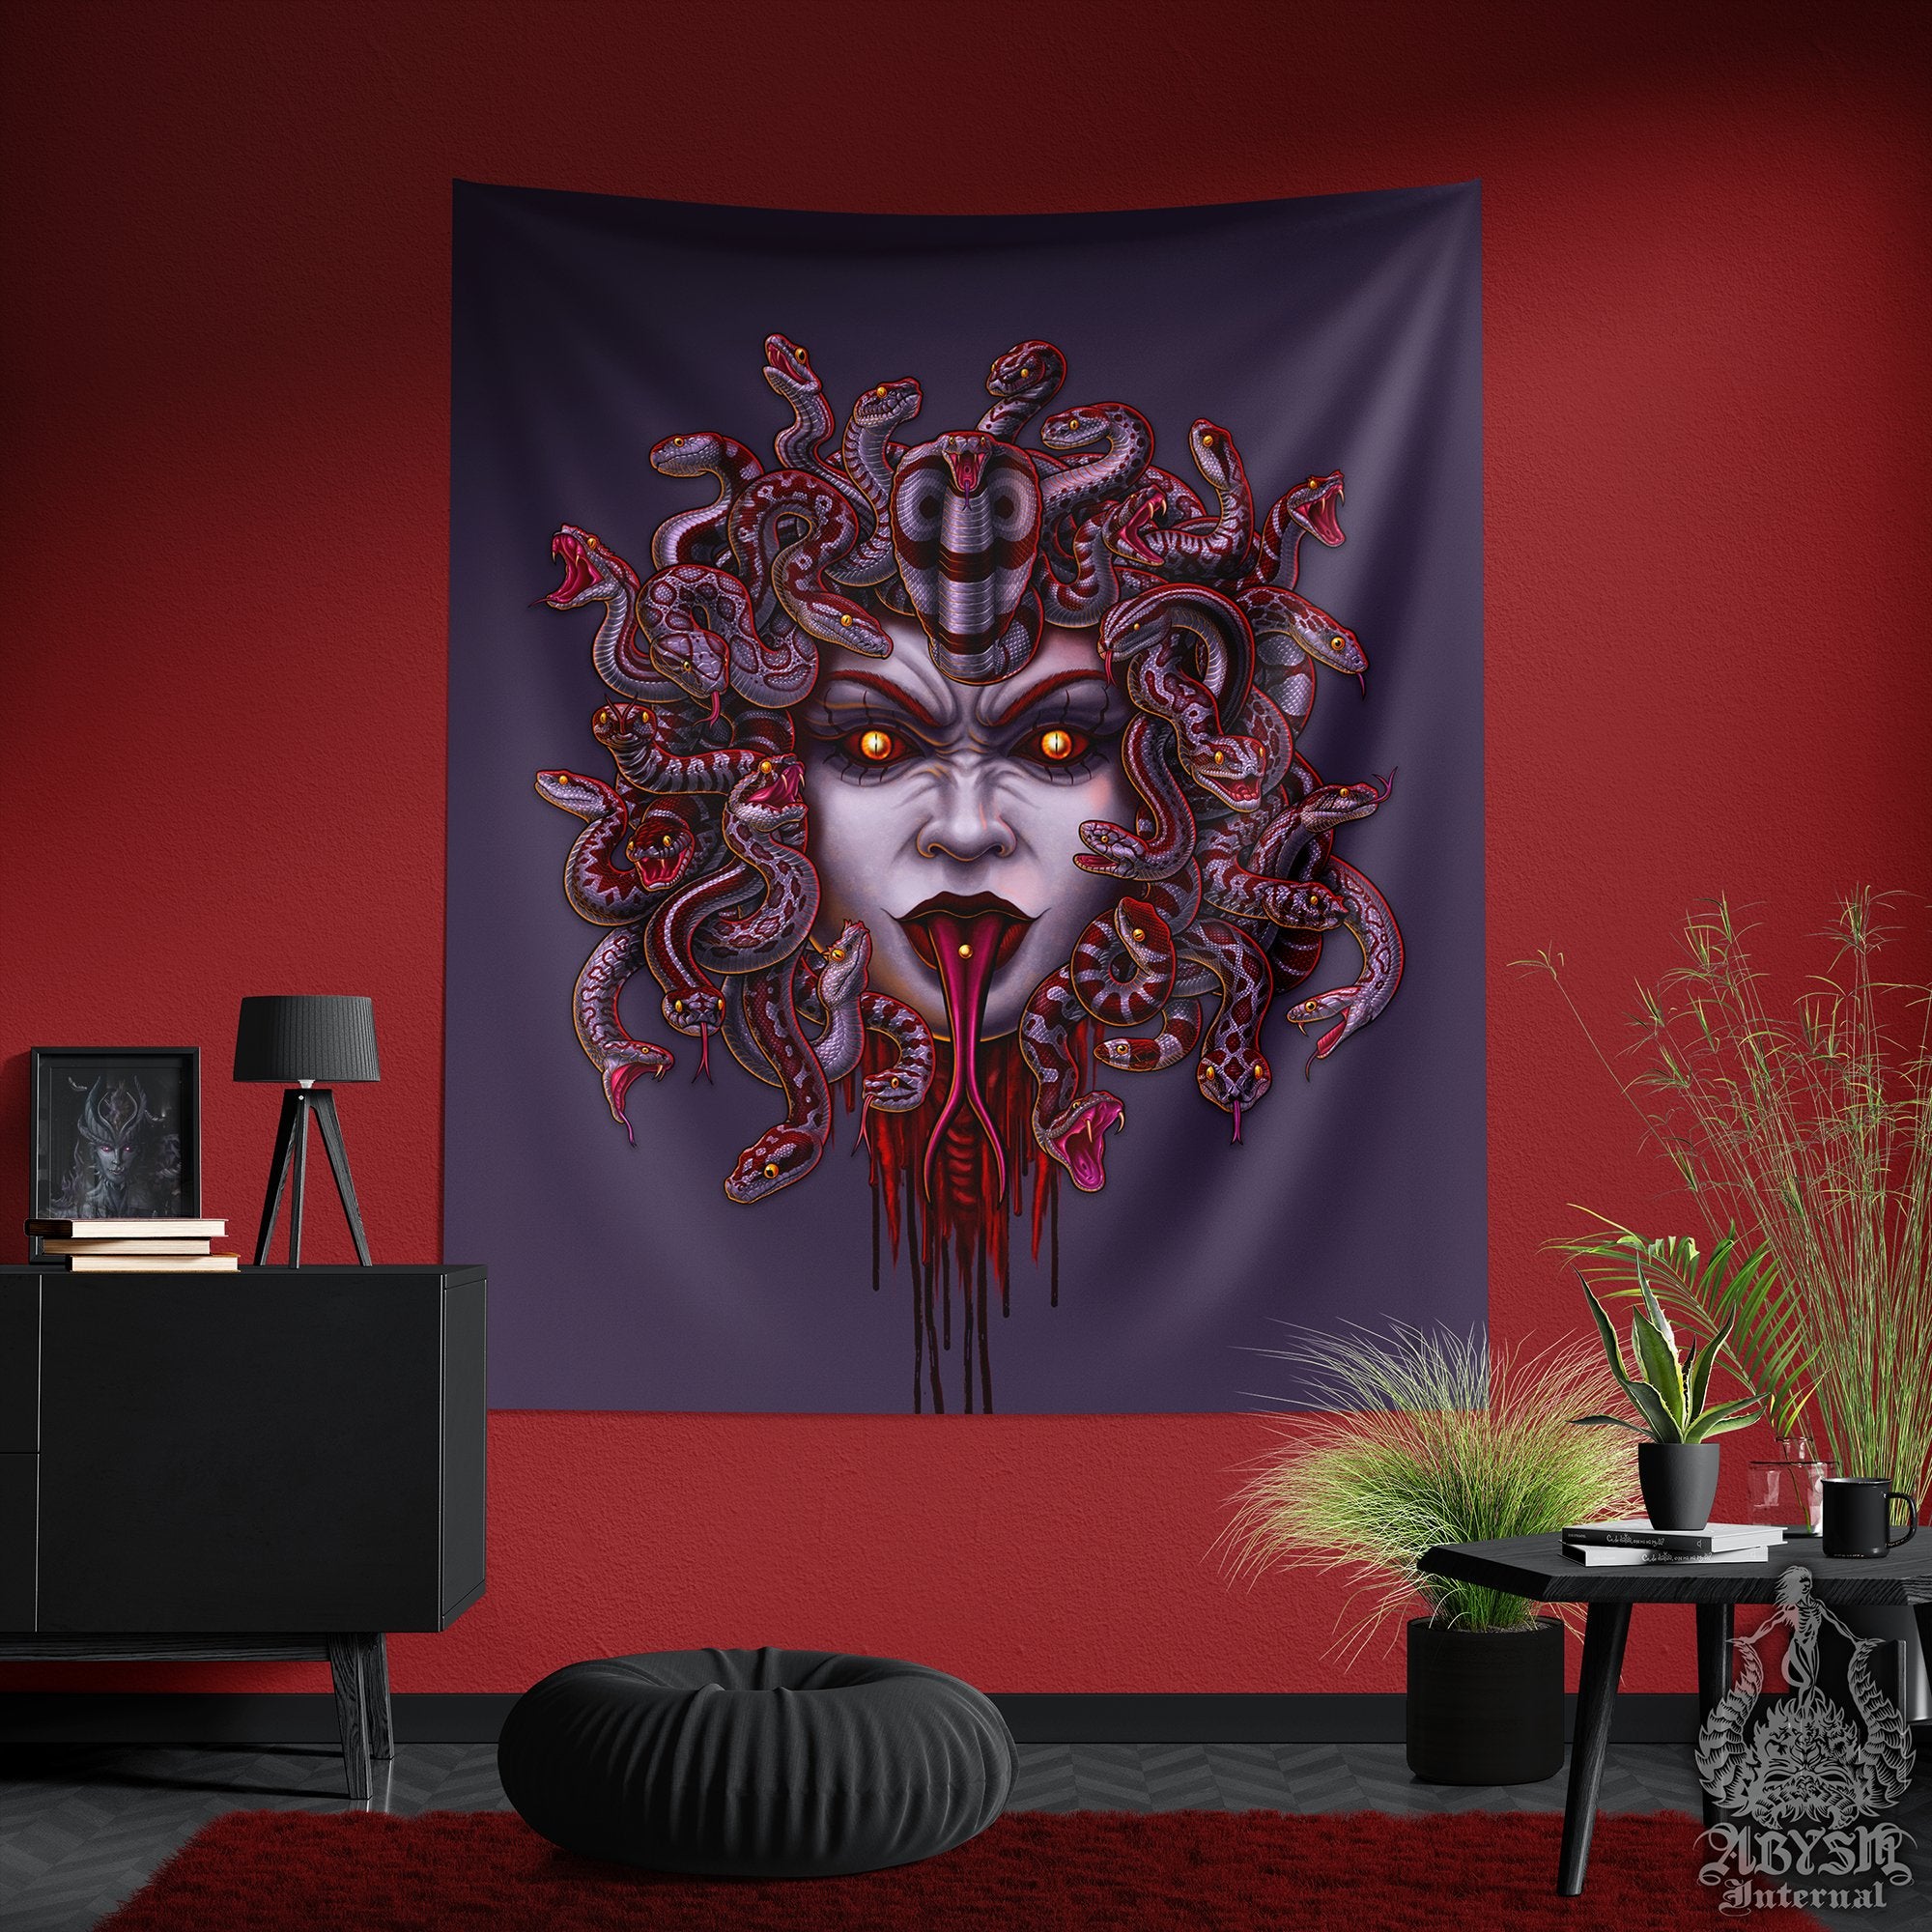 Medusa Tapestry, Goth Wall Hanging, Fantasy Home Decor, Vertical Art Print - Bloody Ash, Grey Snakes, 3 Faces - Abysm Internal